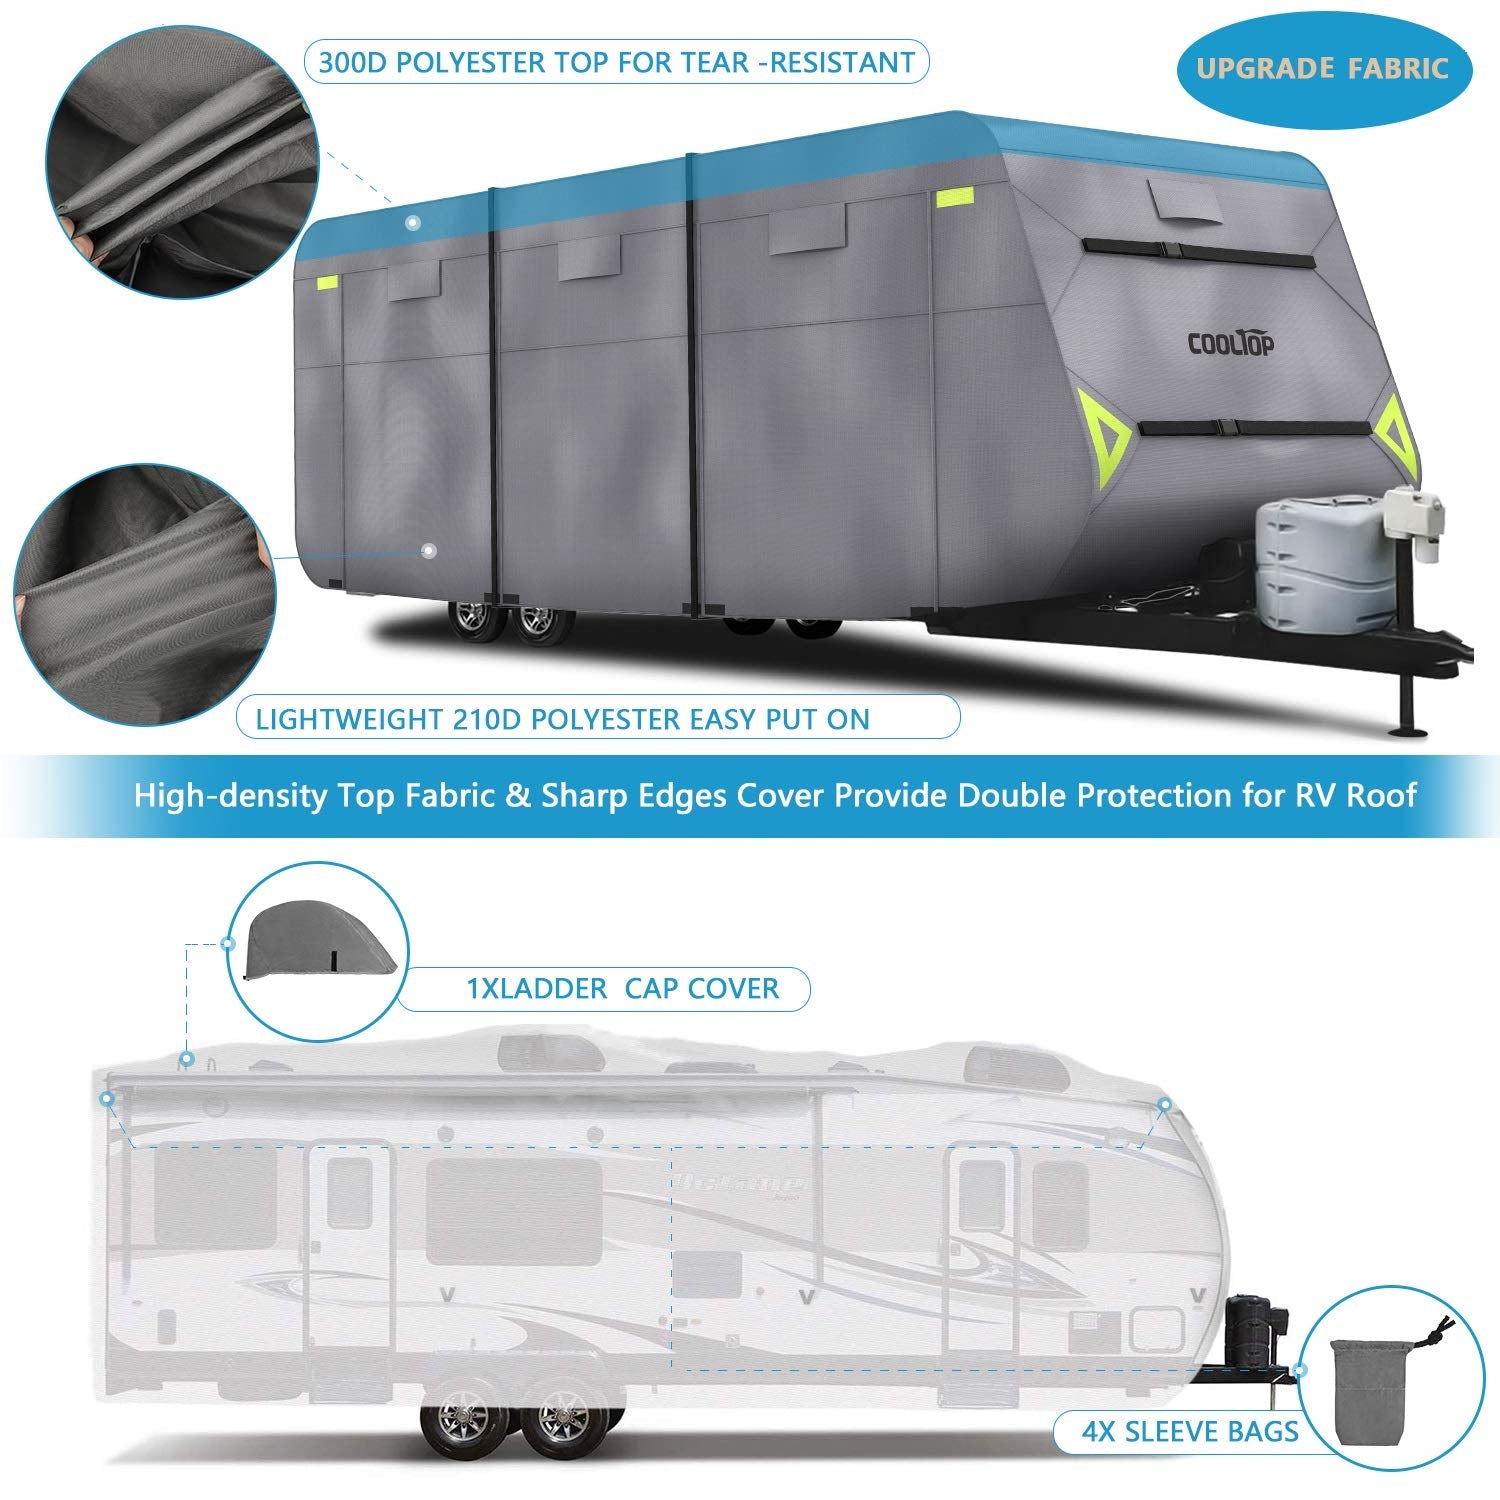 ADCO RV Covers, Travel Trailer Covers, ADCO Products